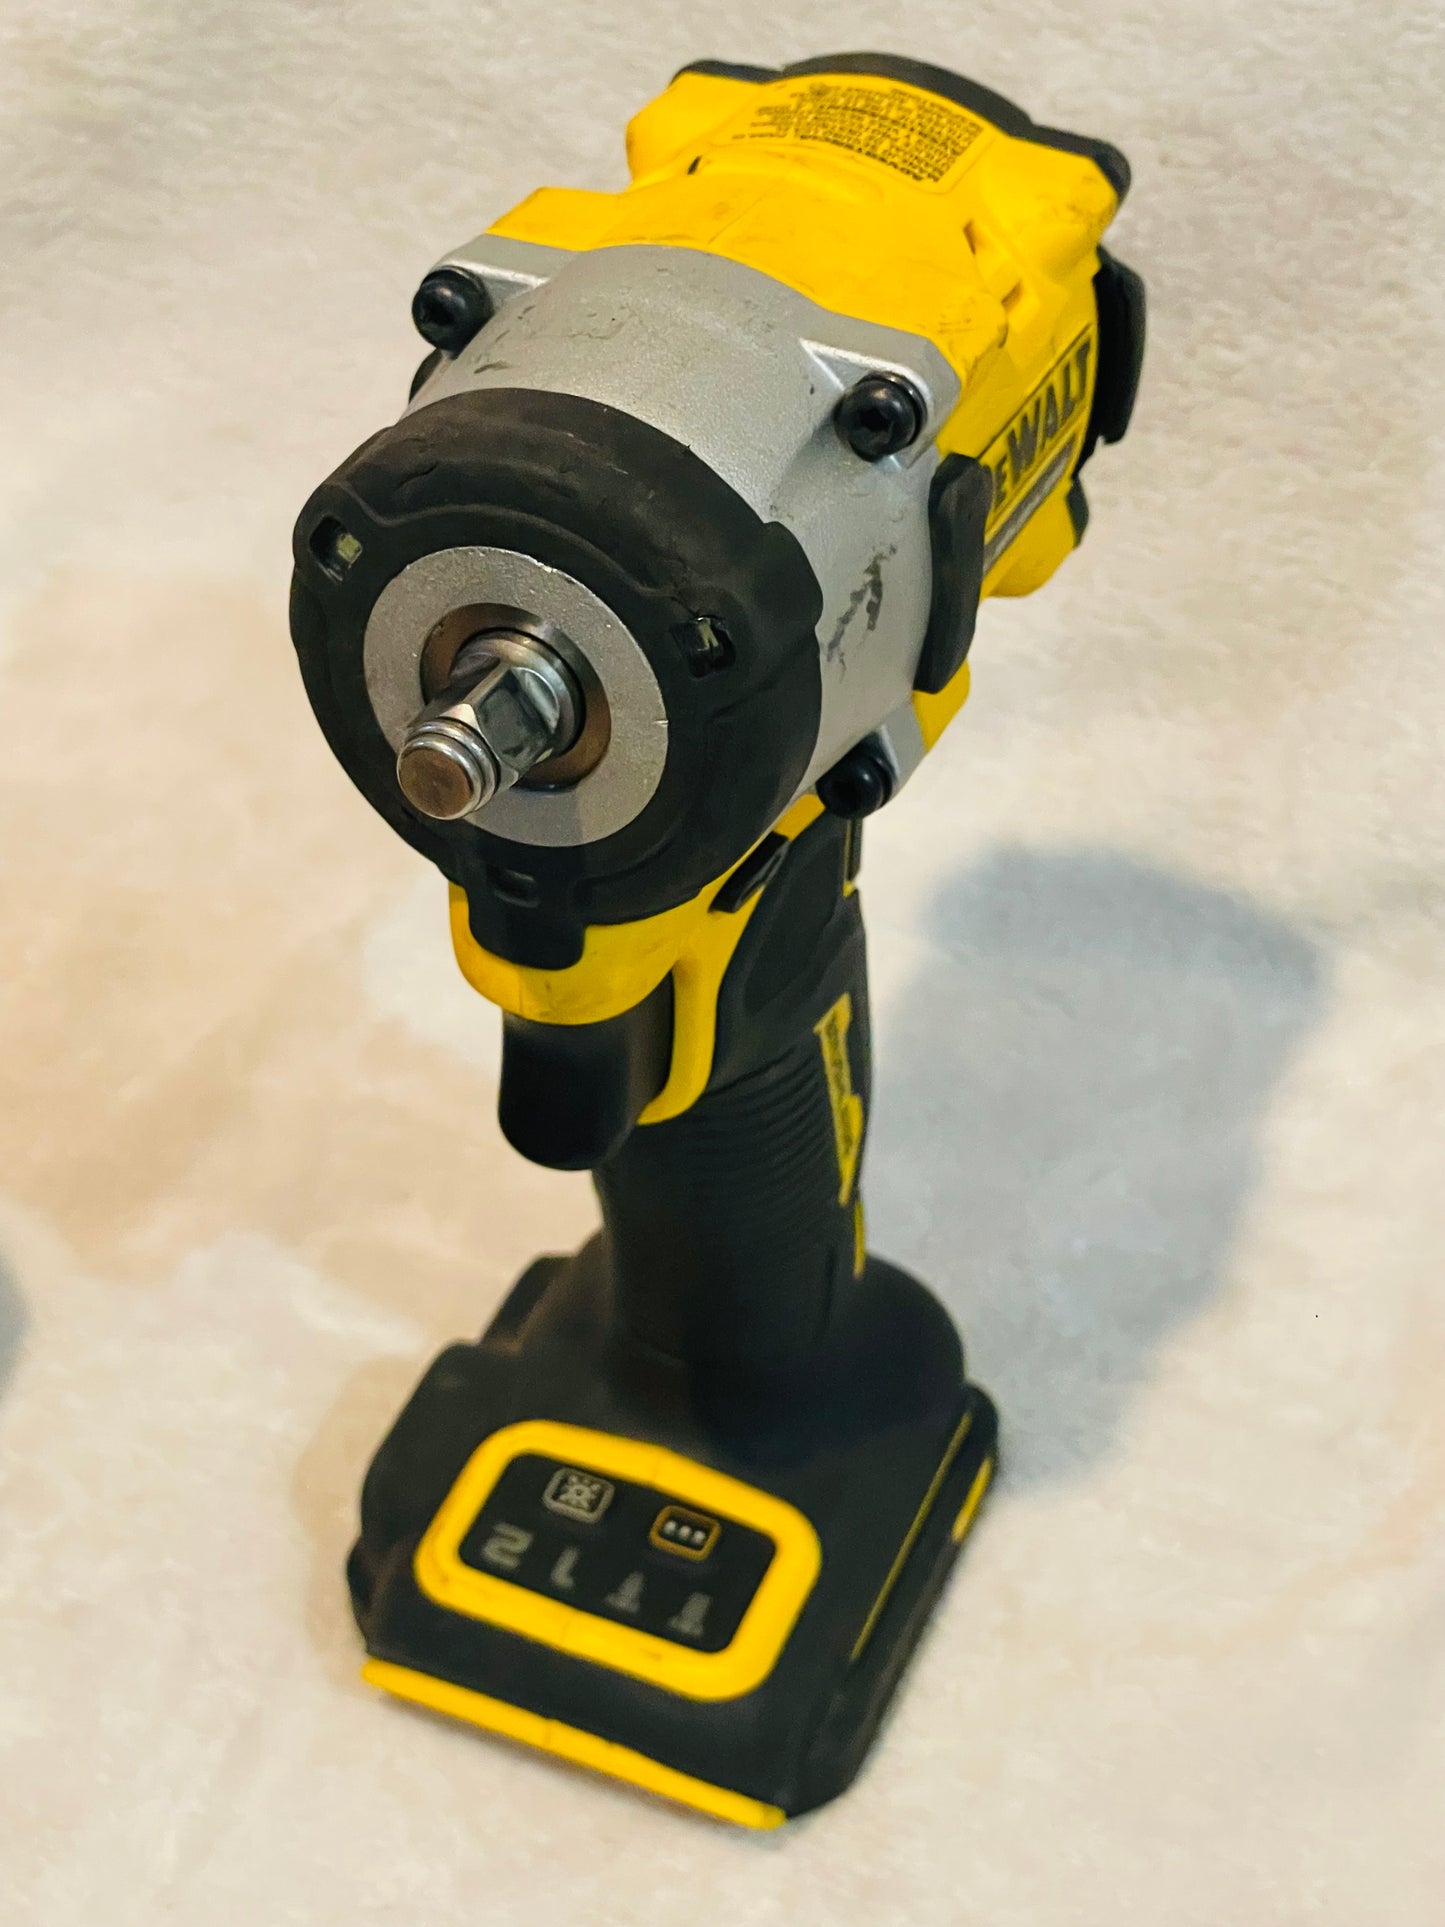 DEWALT ATOMIC 20V Brushless 3/8 in.Variable Speed Impact Wrench with (1) 2ah Battery and Charger